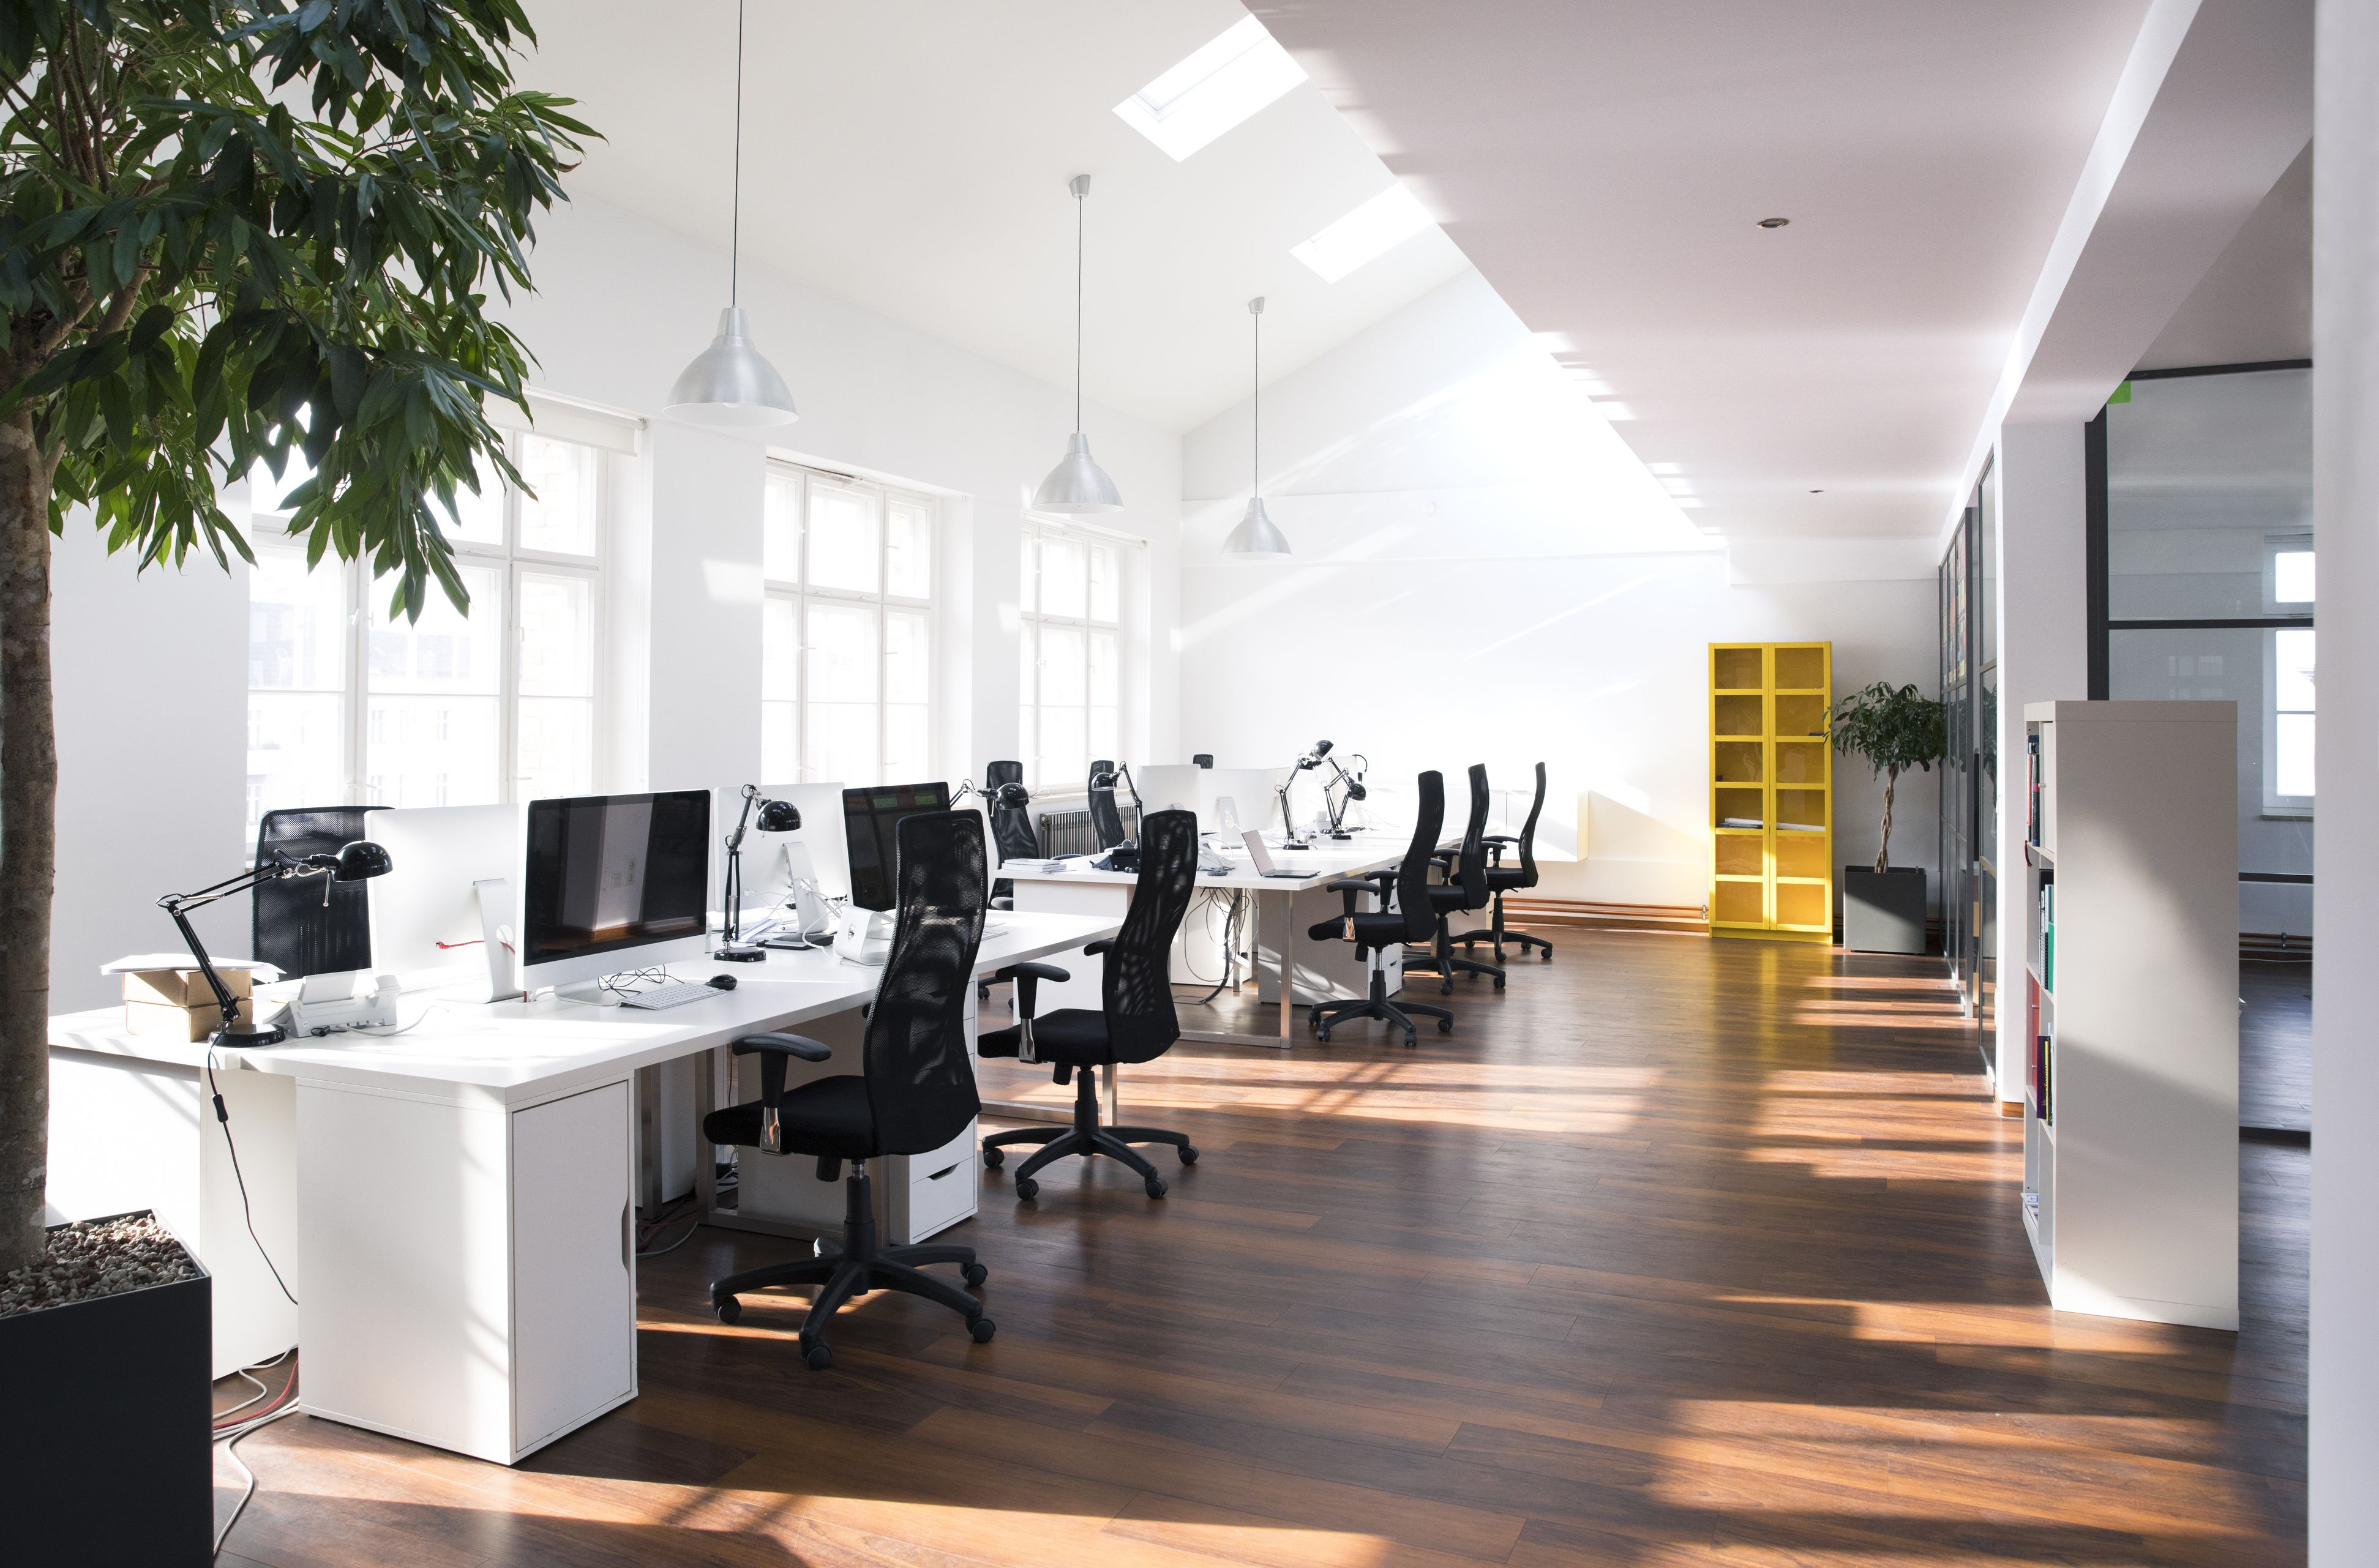 22 Great Hardwood Flooring Business Names 2024 free download hardwood flooring business names of learn about inactive business intended for desks with pcs in bright and modern open space office 898700298 5b089141fa6bcc0037c8f785